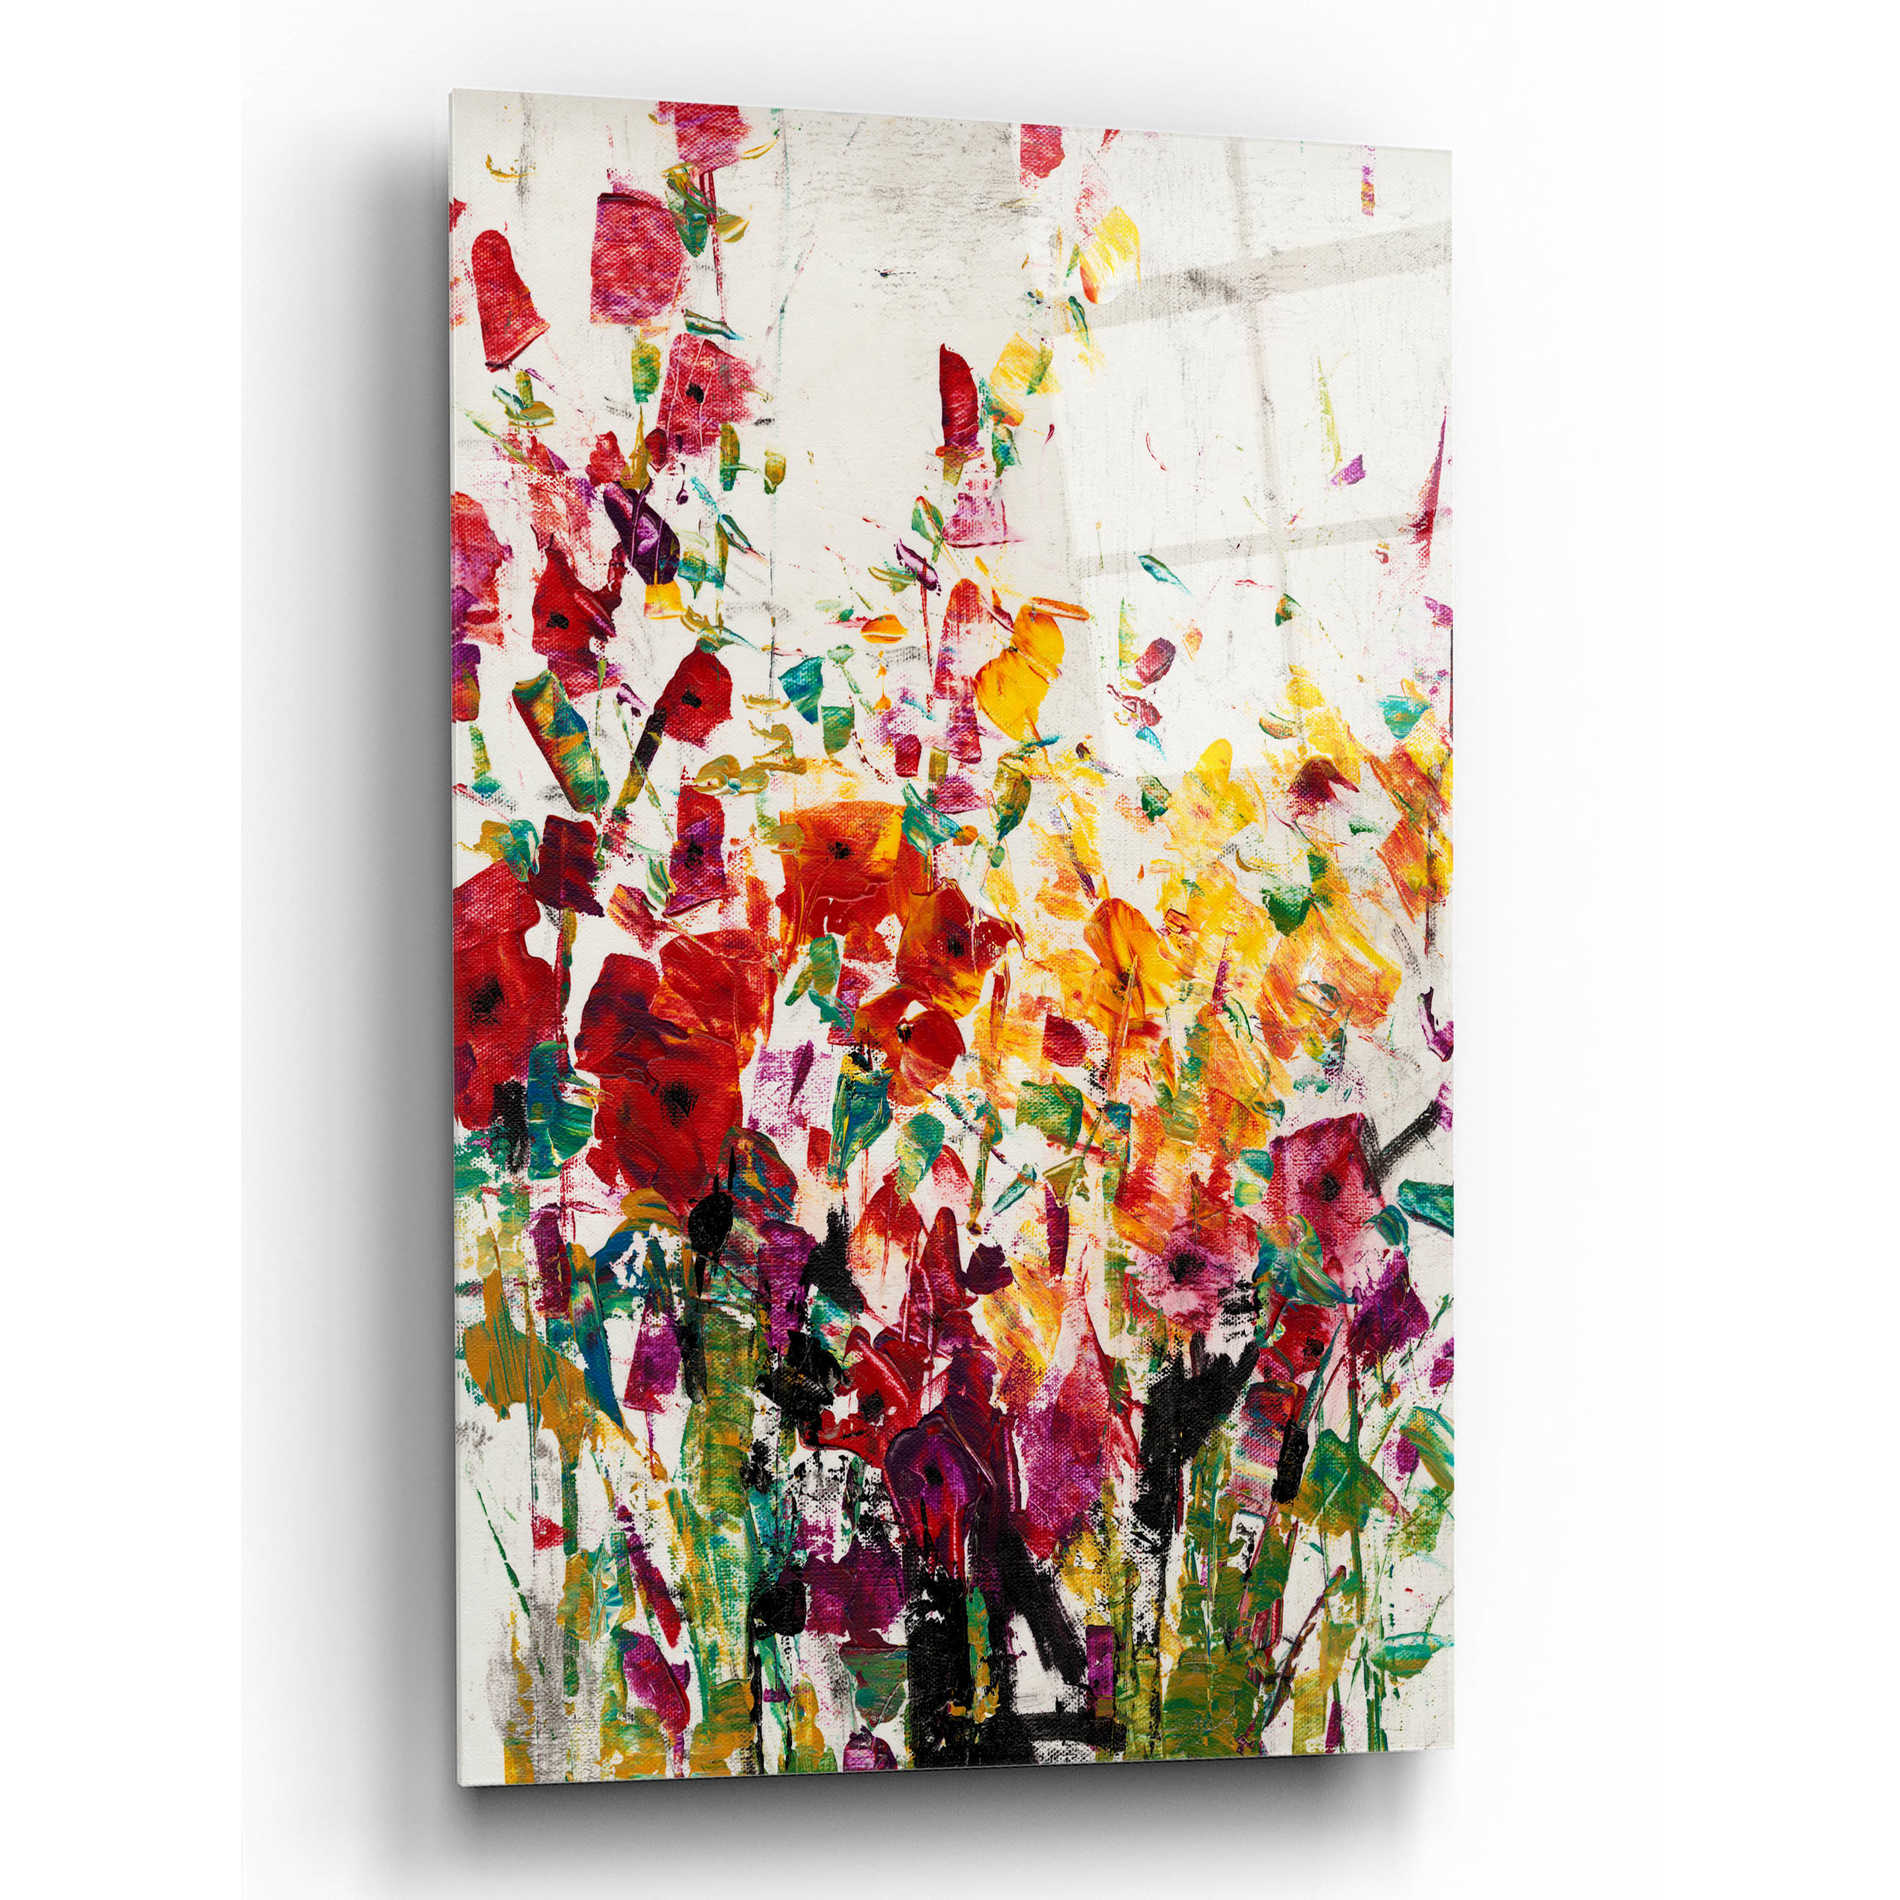 Epic Art 'Wildflowers Blooming I' by Tim O'Toole, Acrylic Glass Wall Art,12x16